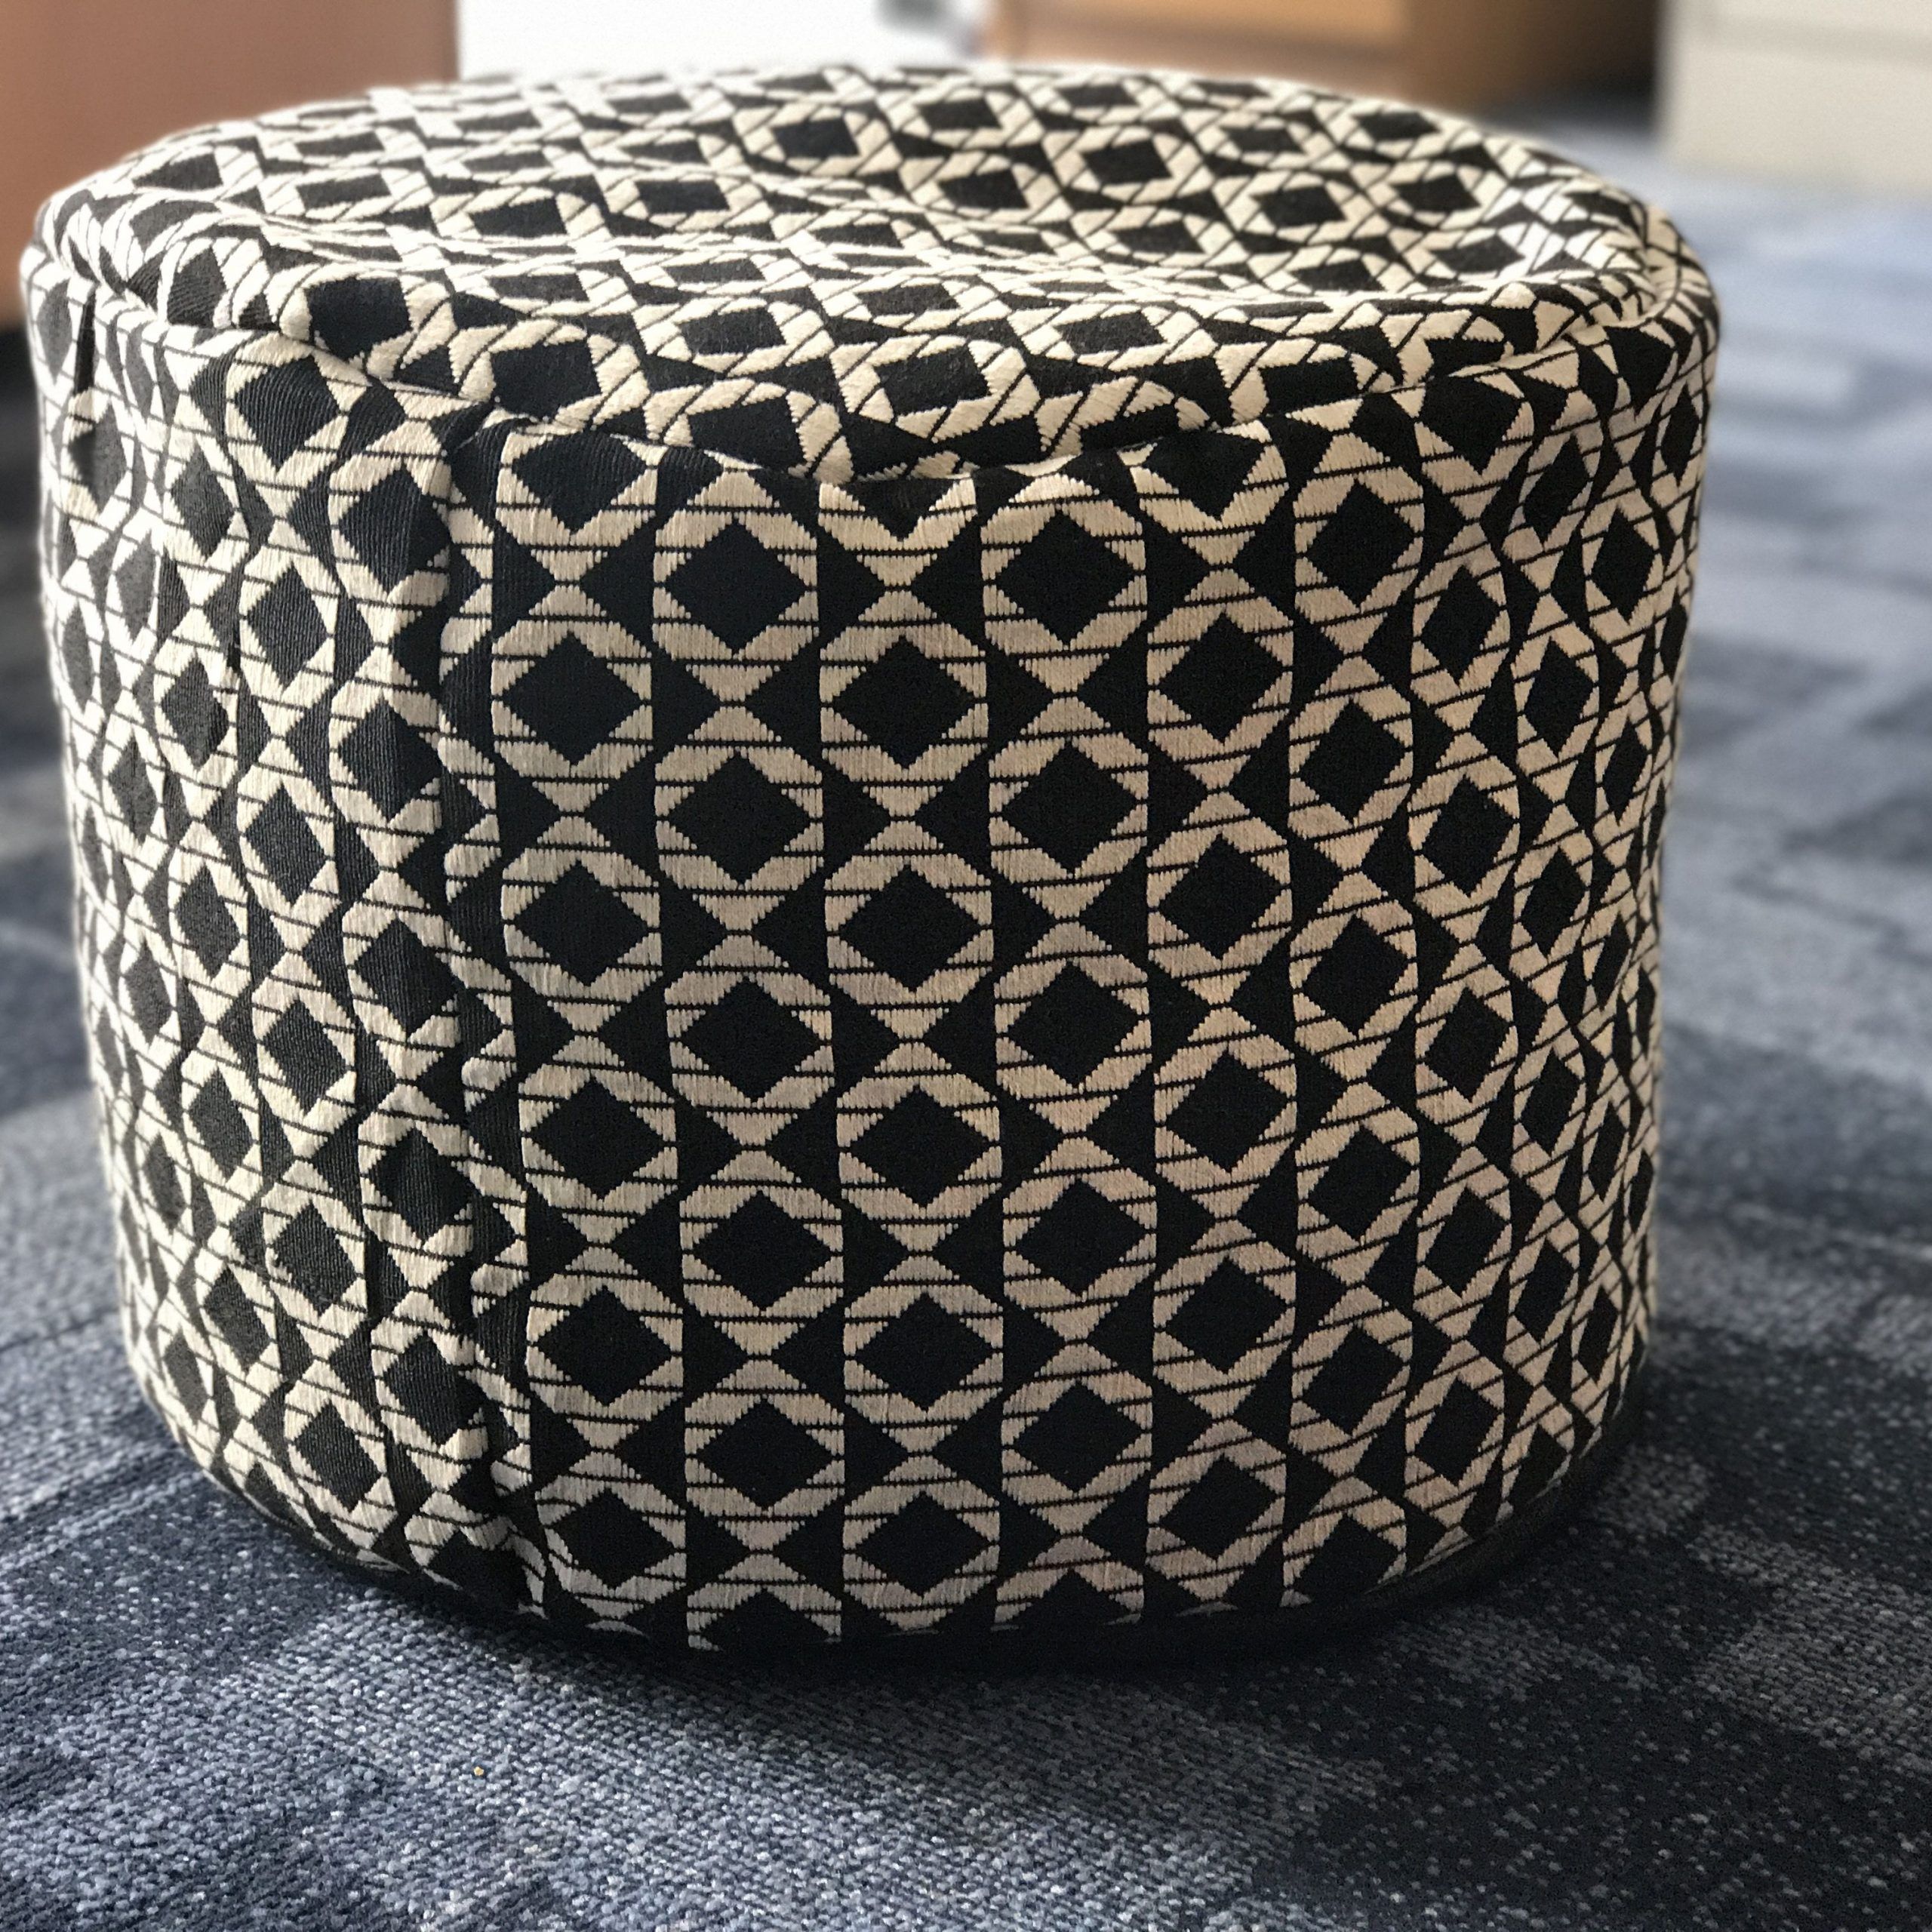 Design Cube Footstool From B&m Bargains (View 11 of 20)